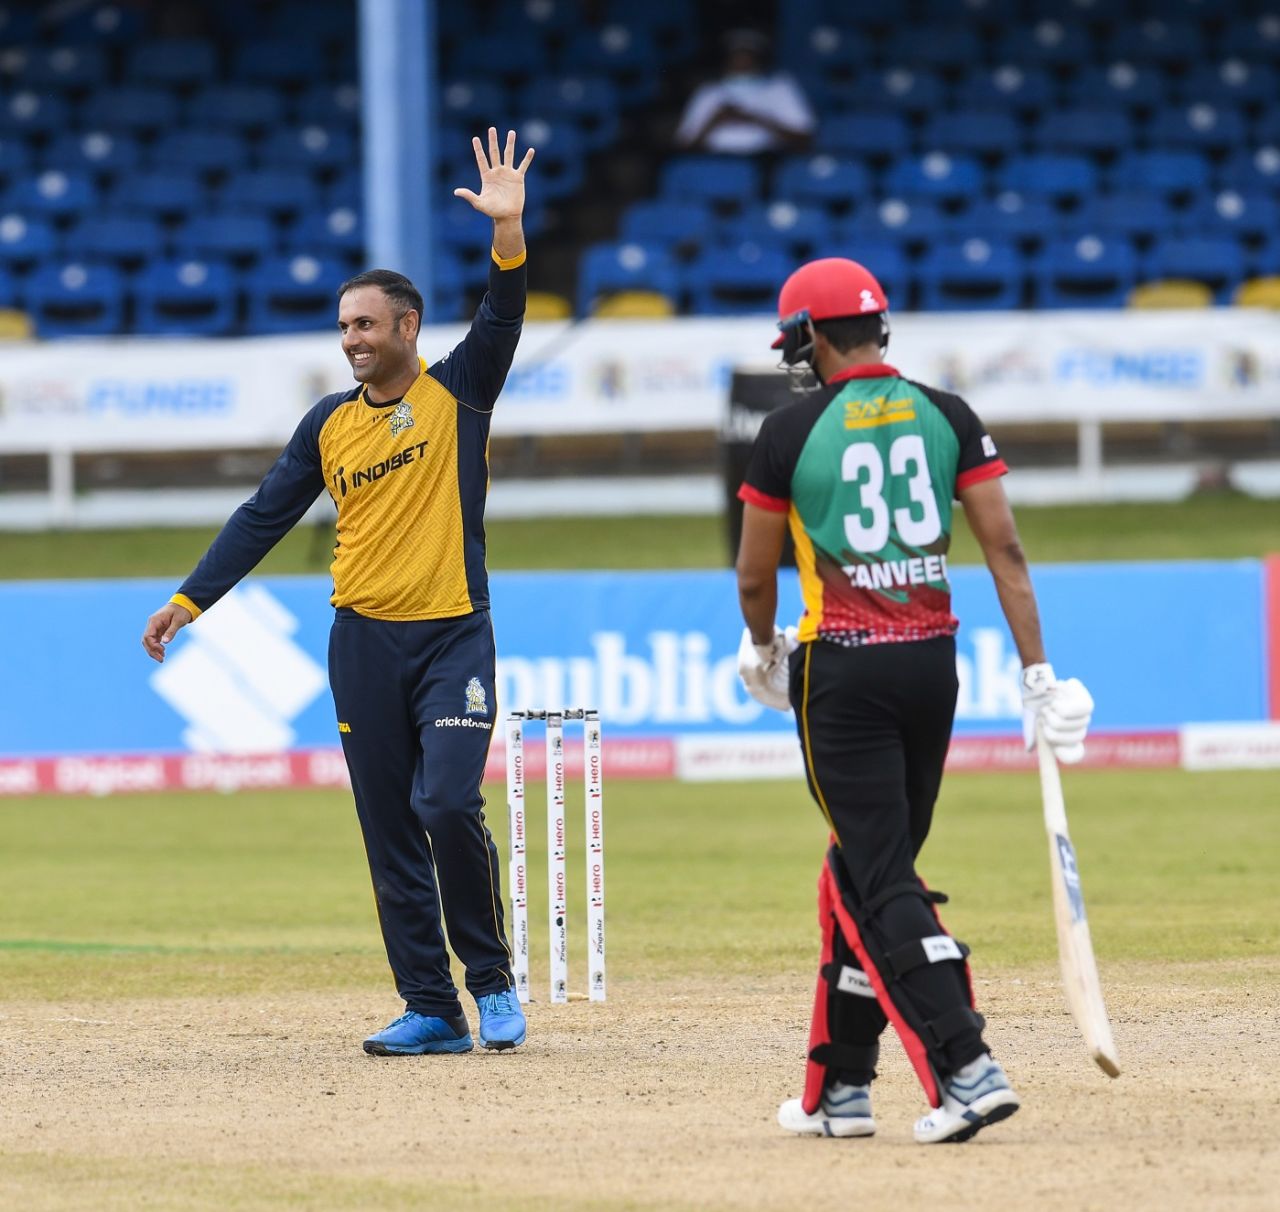 Mohammad Nabi celebrates his five-wicket haul, St Kitts and Nevis Patriots v St Lucia Zouks, Port-of-Spain, August 27, 2020